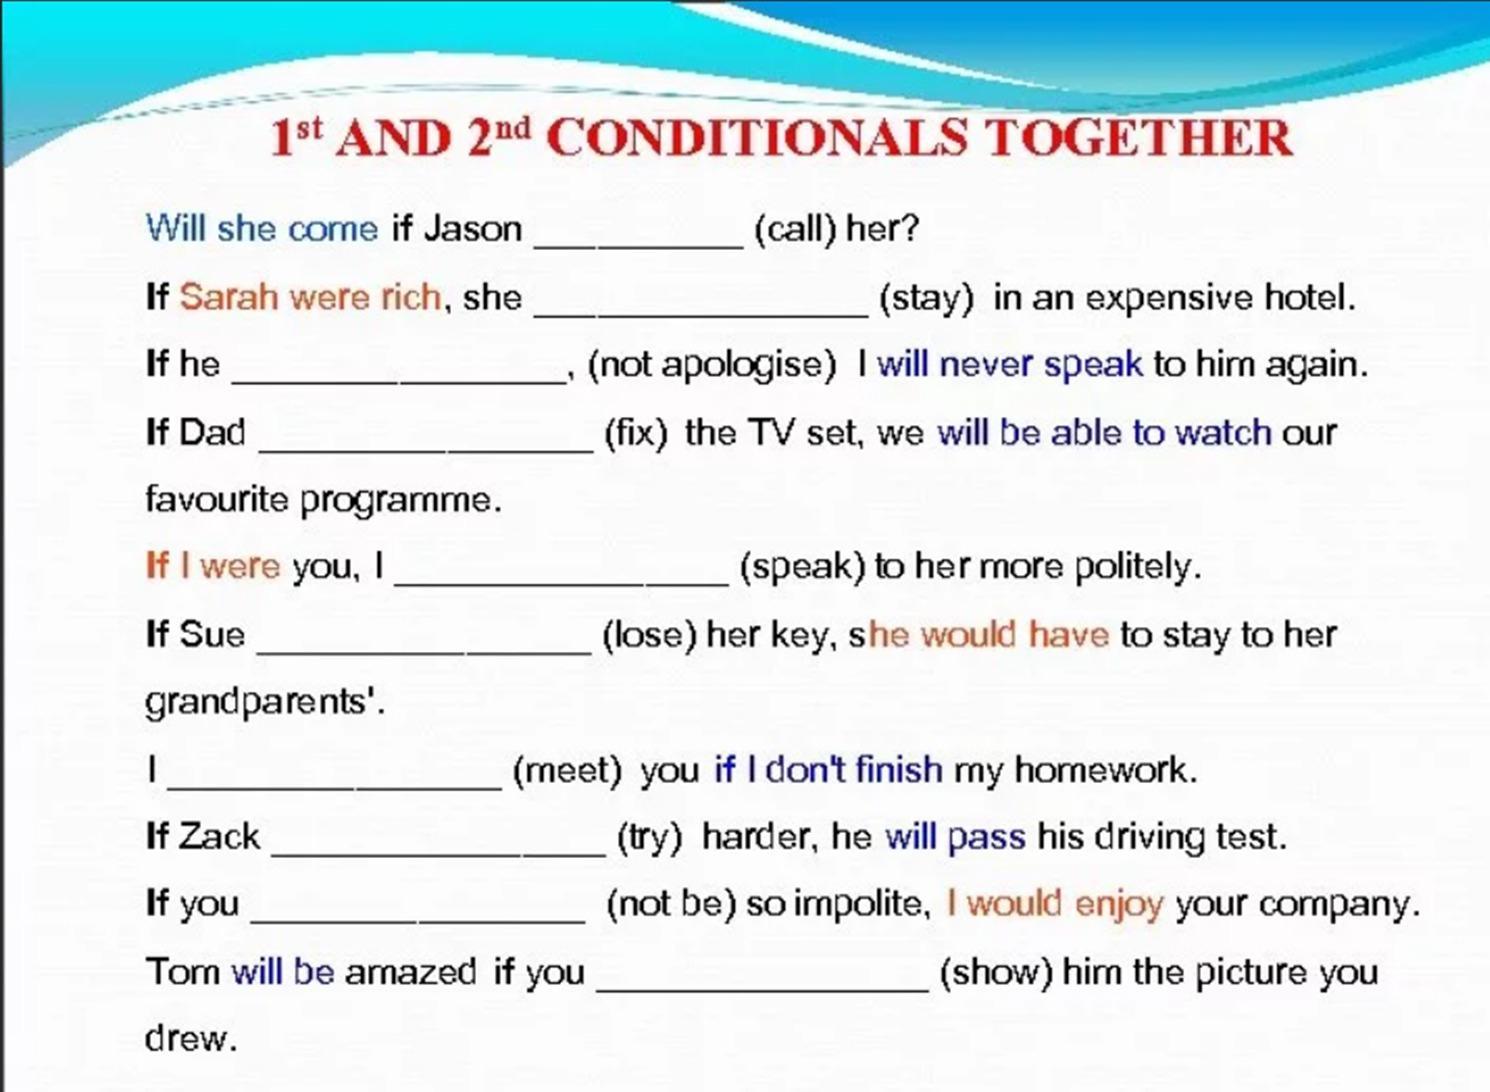 Conditional 2 тест. Английский 1st 2nd conditional. 1st and 2nd conditionals упражнения. First and second conditional упражнения. Zero first and second conditionals упражнения.